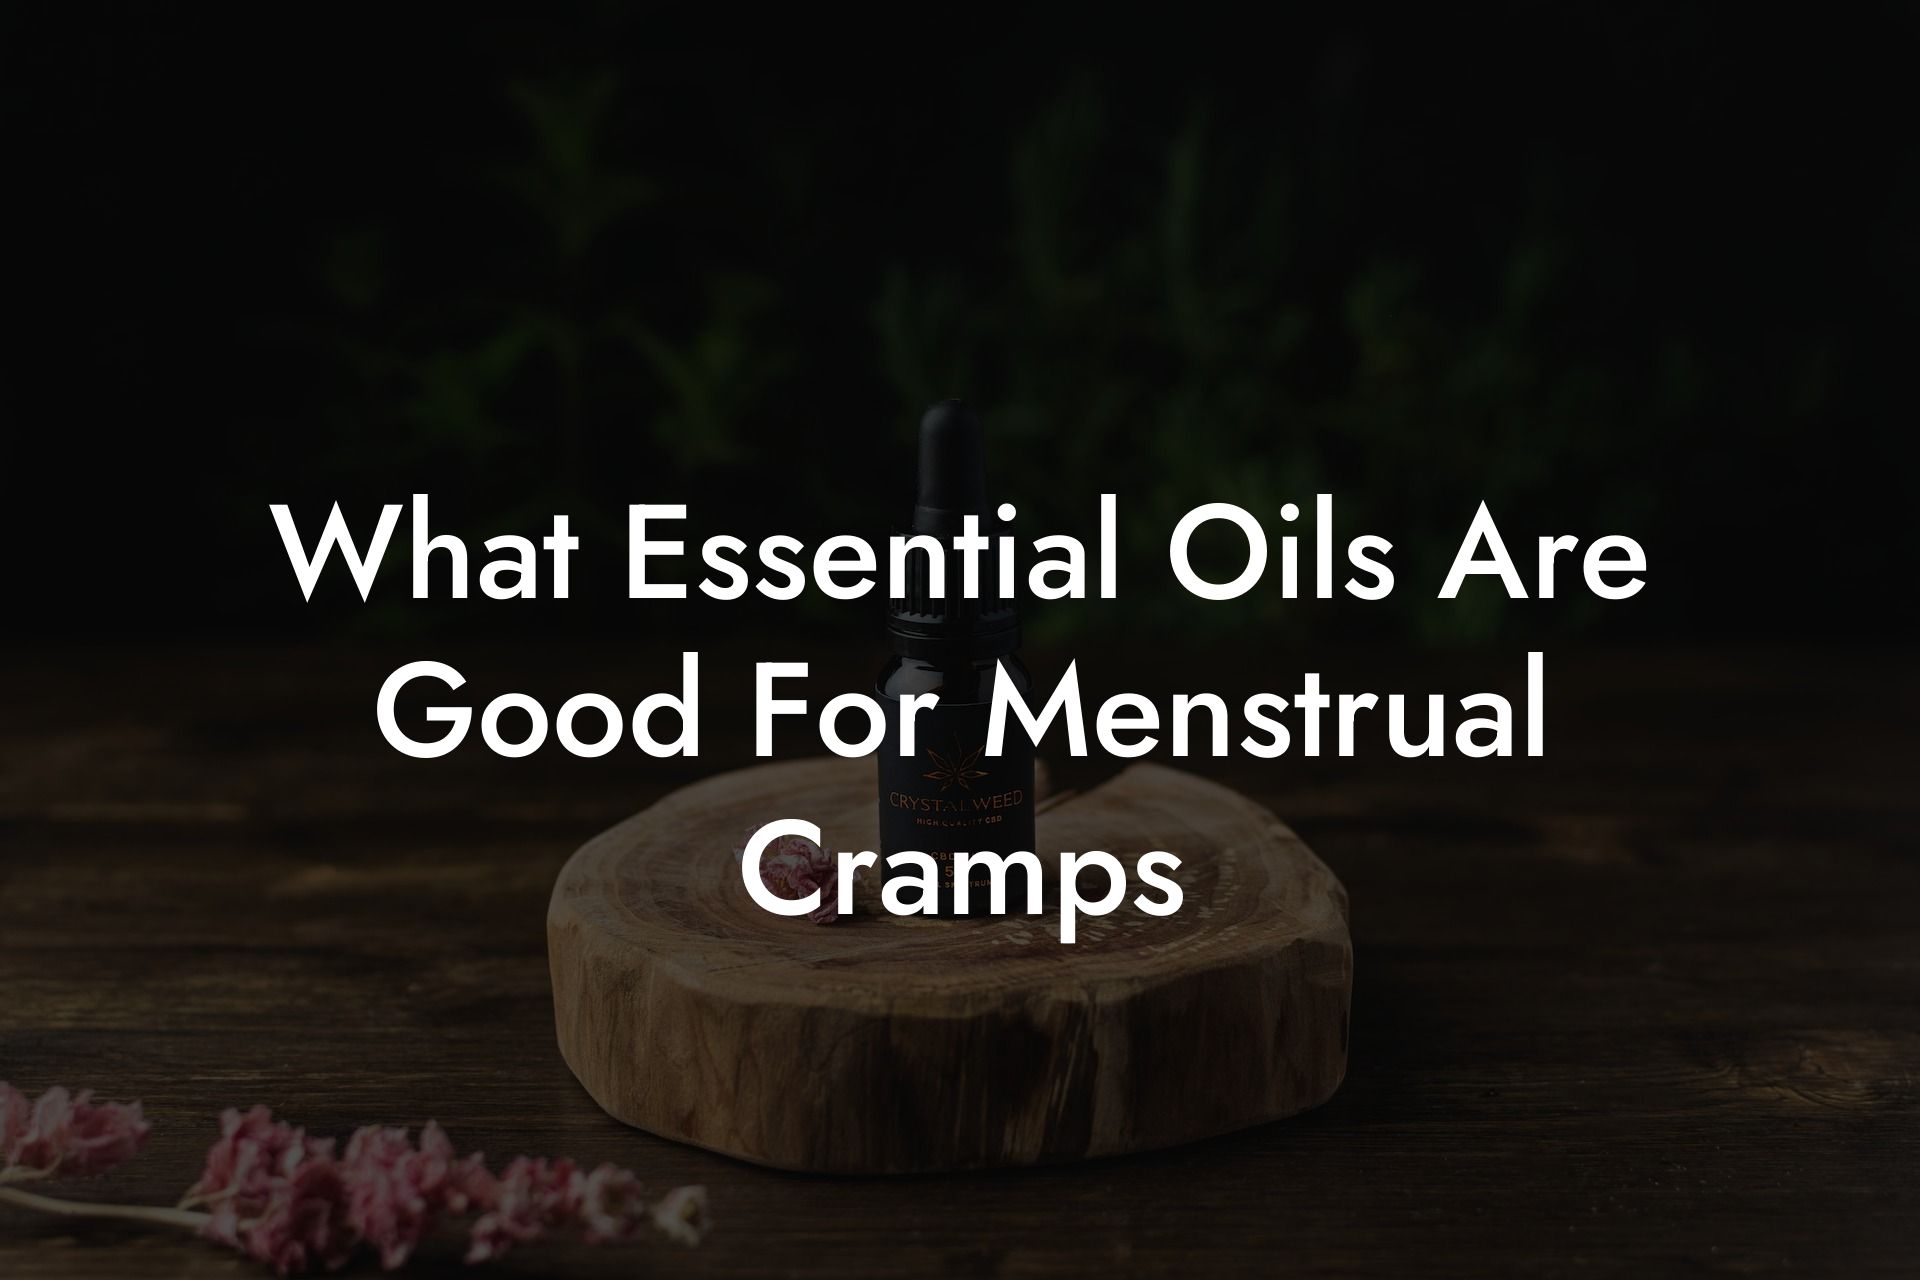 What Essential Oils Are Good For Menstrual Cramps